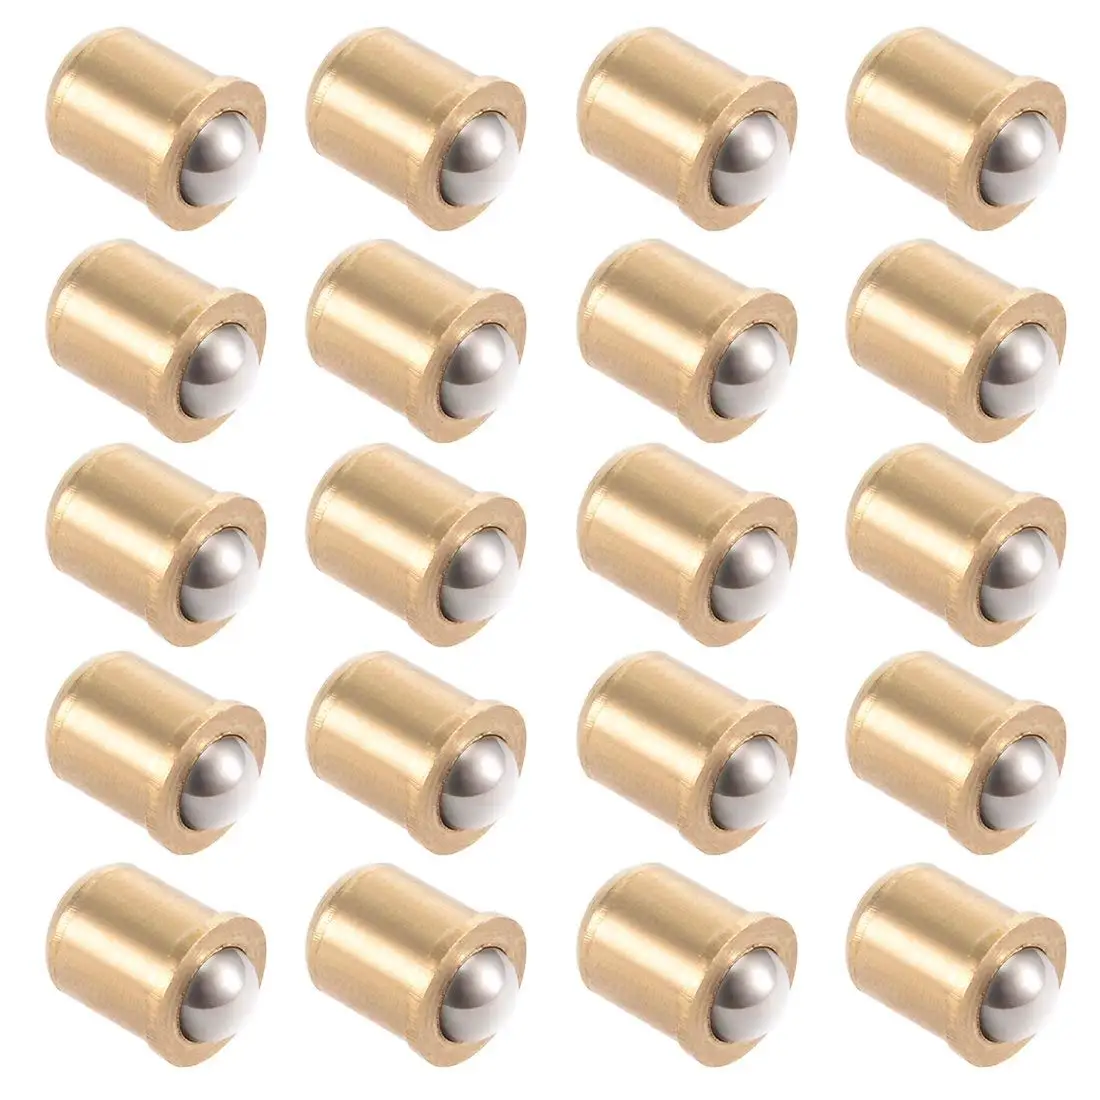 20pcs 5mm Ball Dia Brass Electroplating Door Cabinet Ball Catch Latch Closures Locked Bead Door Touch touch Marble